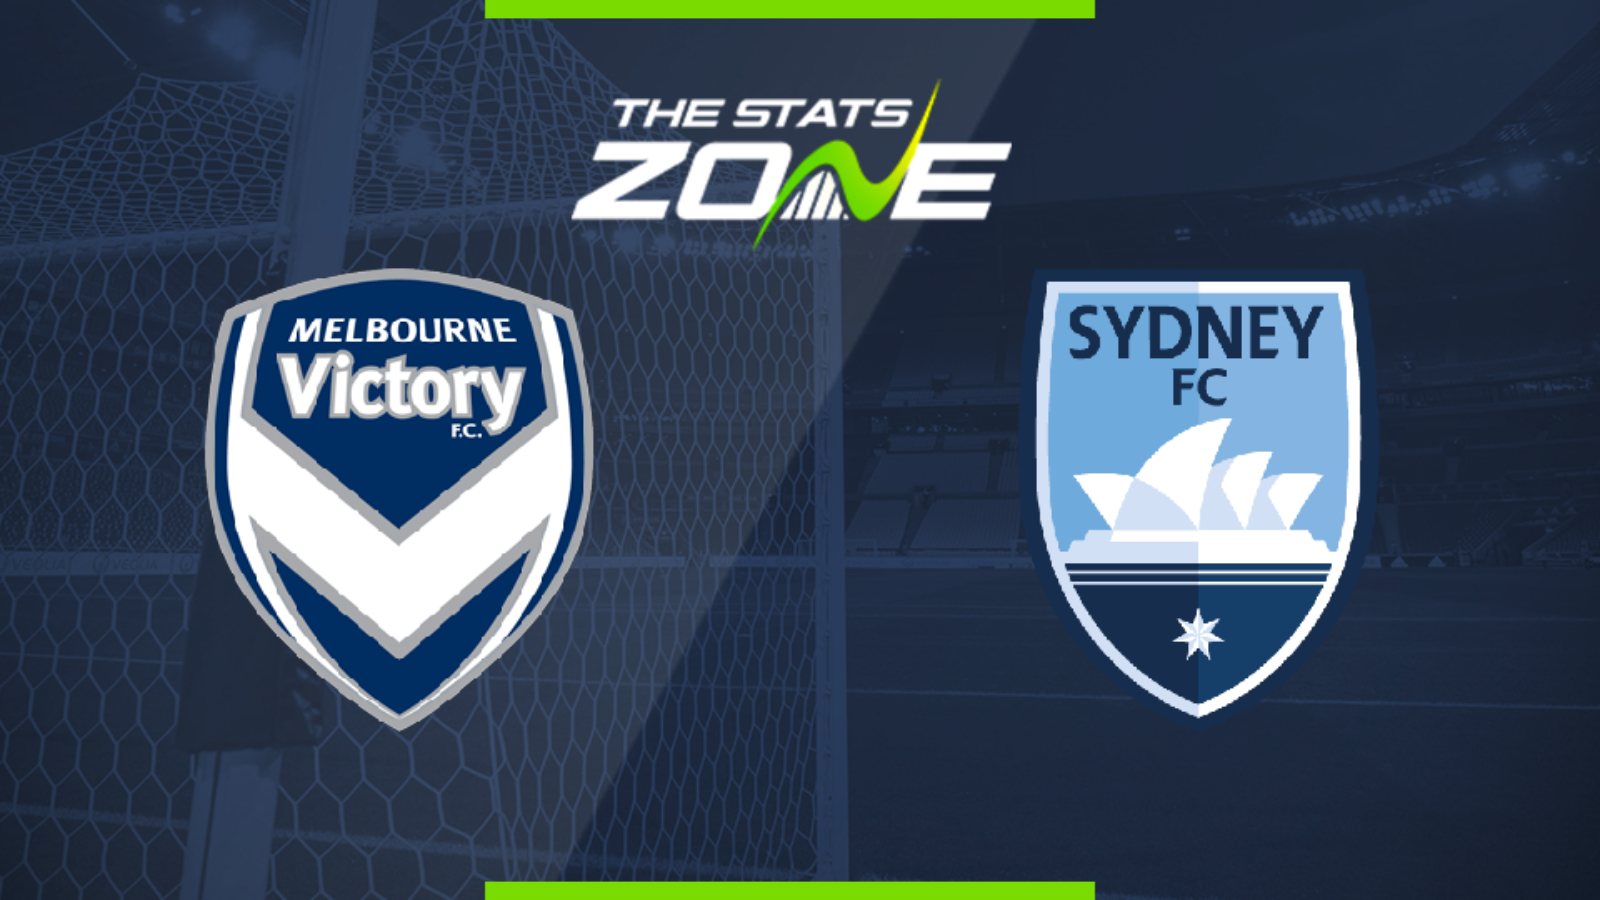 2019 20 A League Melbourne Victory Vs Sydney Fc Preview And Prediction The Stats Zone